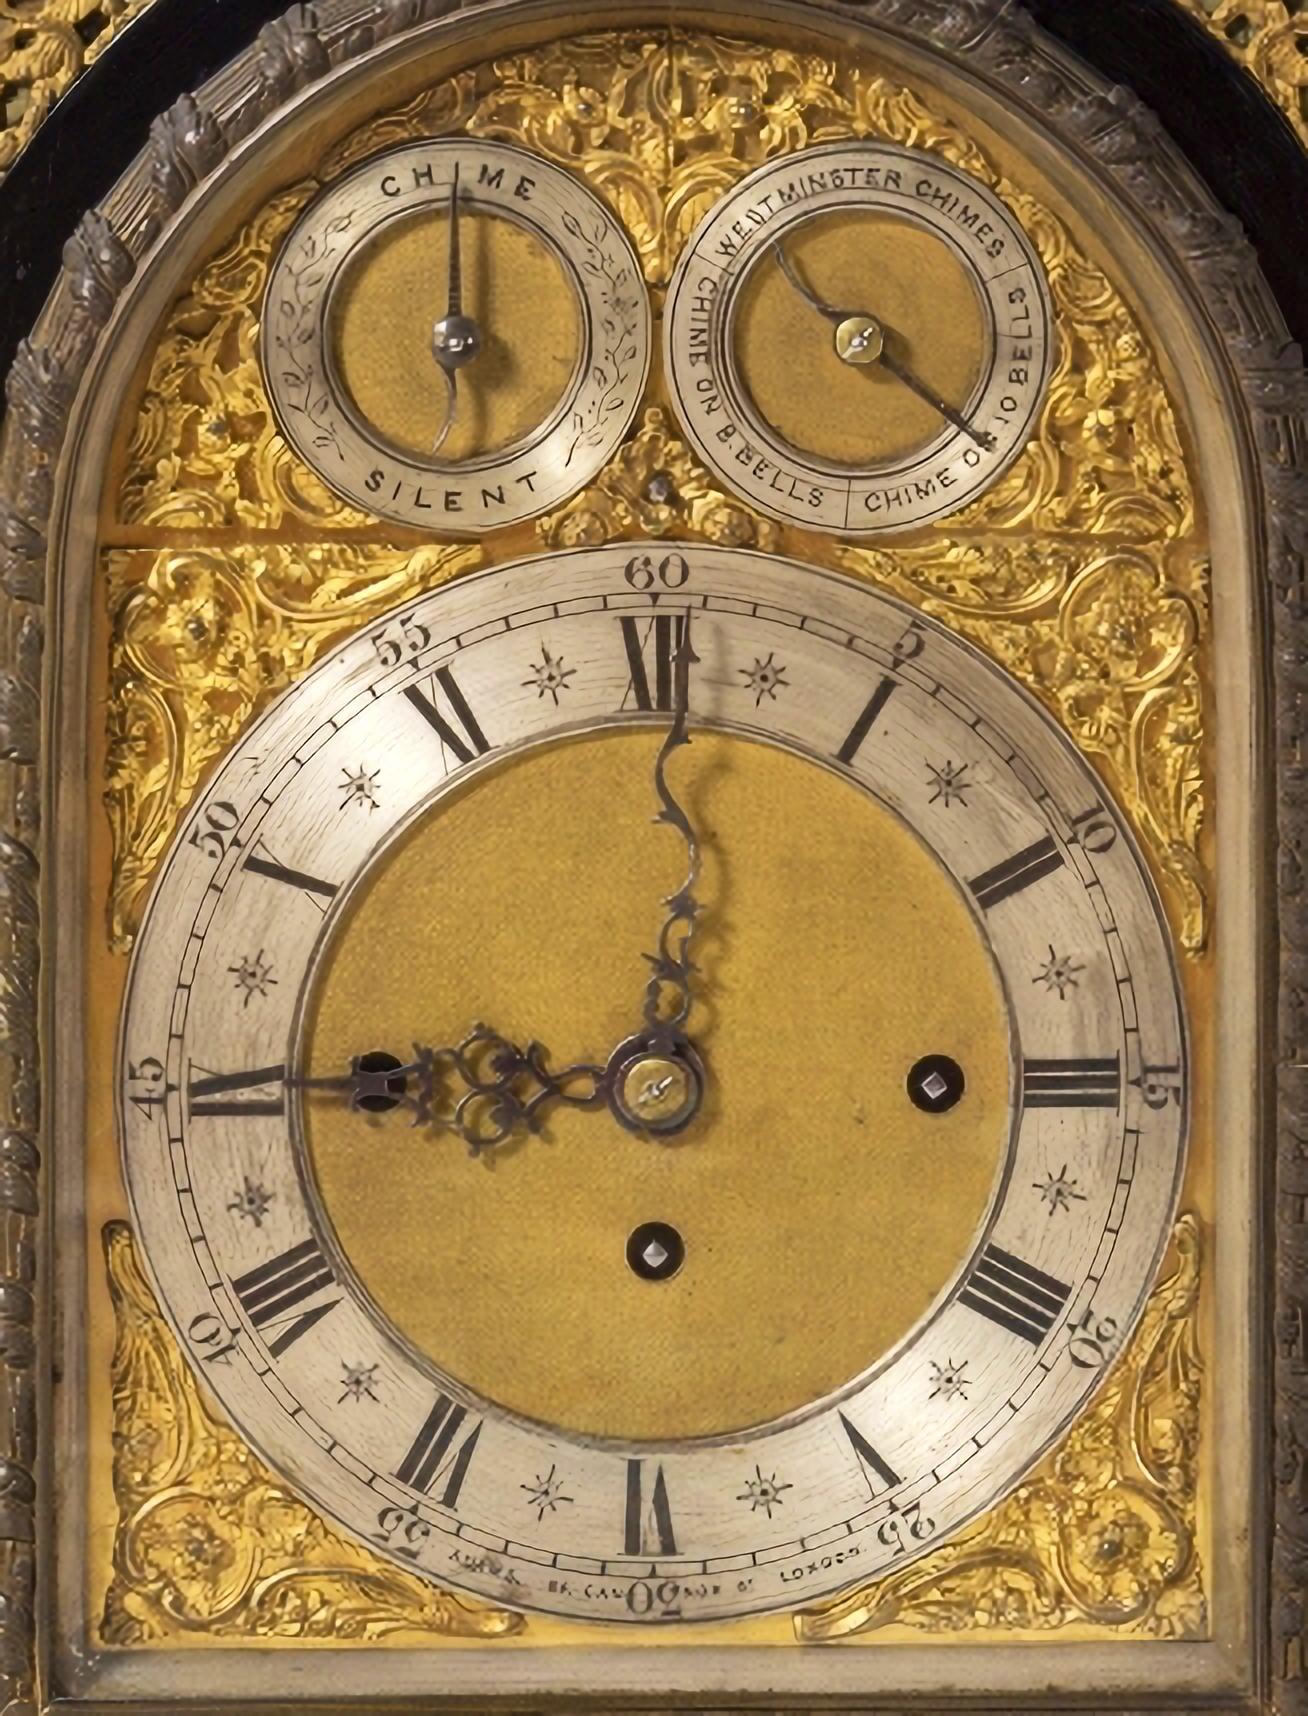 LARGE DESK CLOCK

Victorian,
19th Century
Brass dial with Roman numerals, marked Adams, 84 Cannon Street, London.
Containing two Chime-silent bows and selection of Westminster Chimes.
Carillons on eight bells and ten bells.
Ebonised wooden